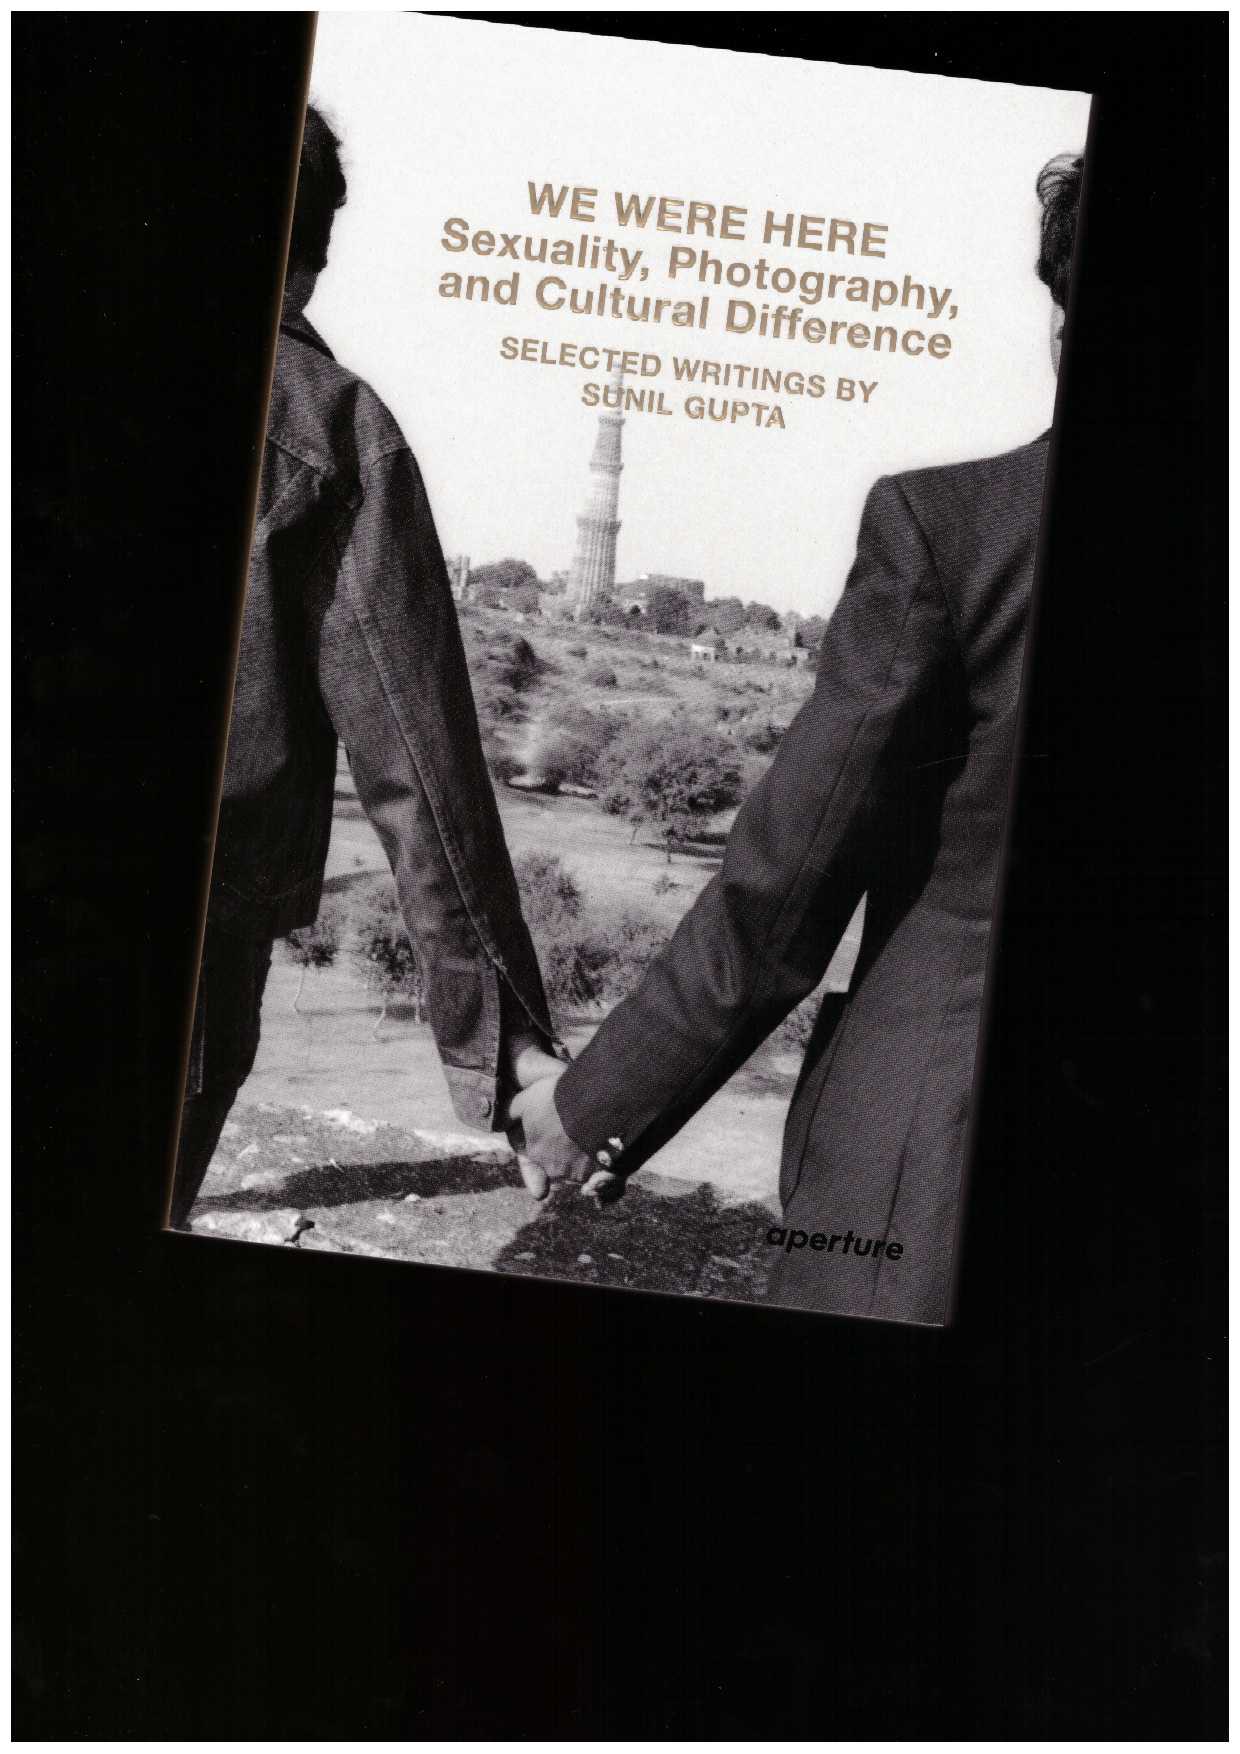 GUPTA, Sunil - We Were Here: Sexuality, Photography, and Cultural Difference. Selected writings by Sunil Gupta